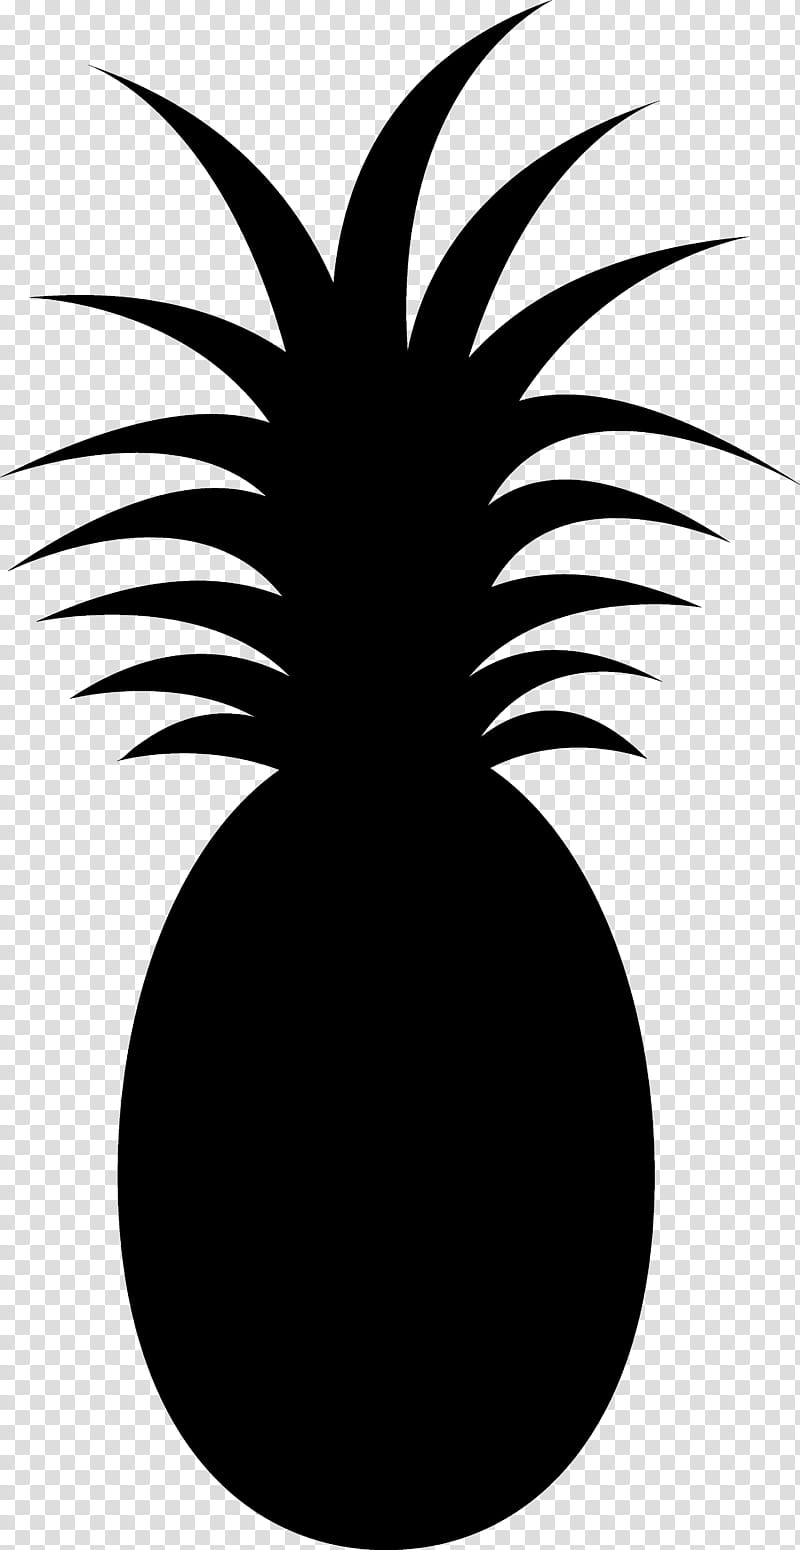 Palm Tree Silhouette, Palm Trees, Leaf, Black, Pineapple, Fruit, Ananas, Plant transparent background PNG clipart